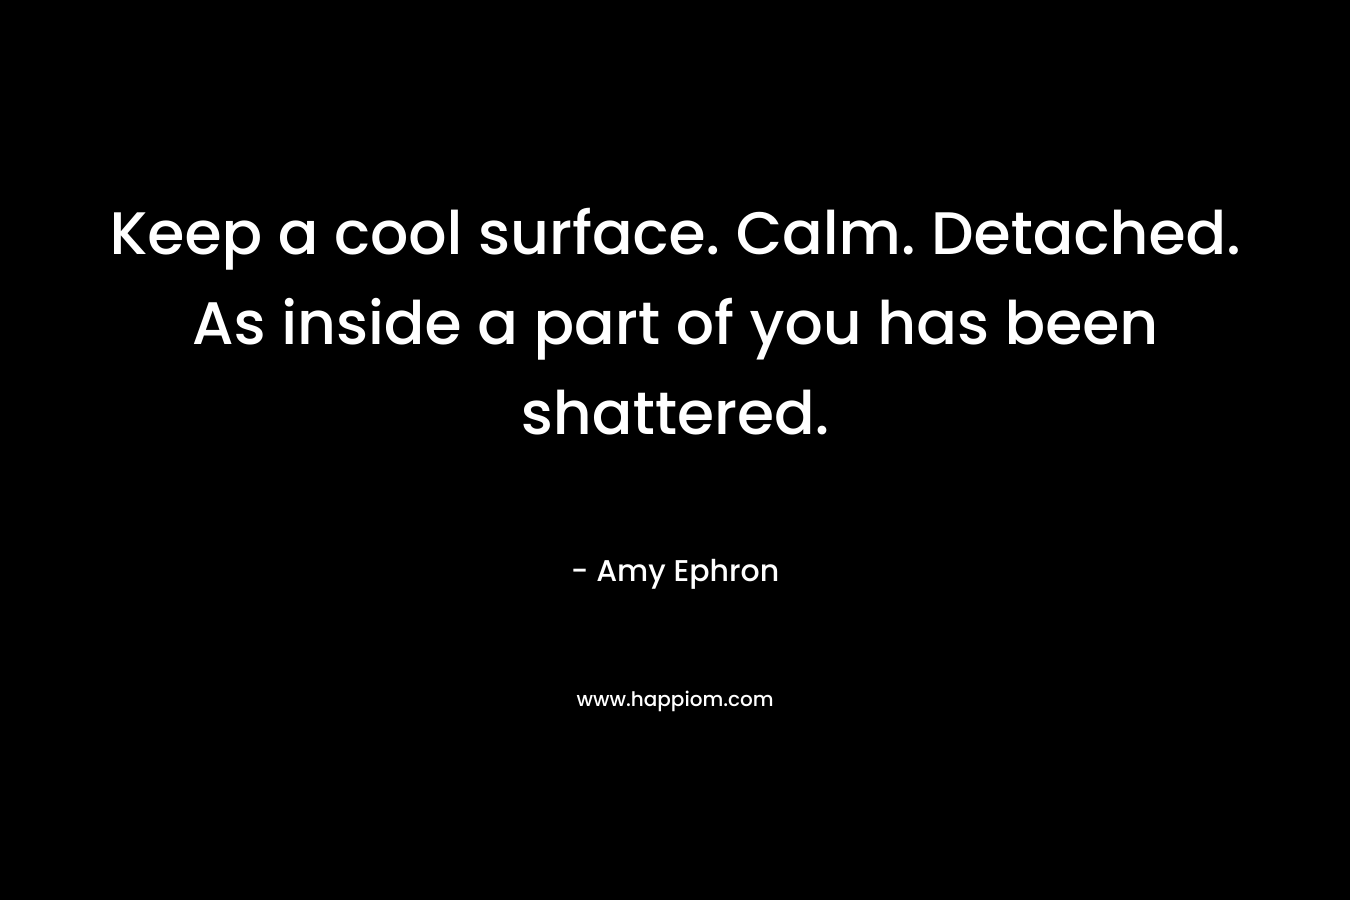 Keep a cool surface. Calm. Detached. As inside a part of you has been shattered.